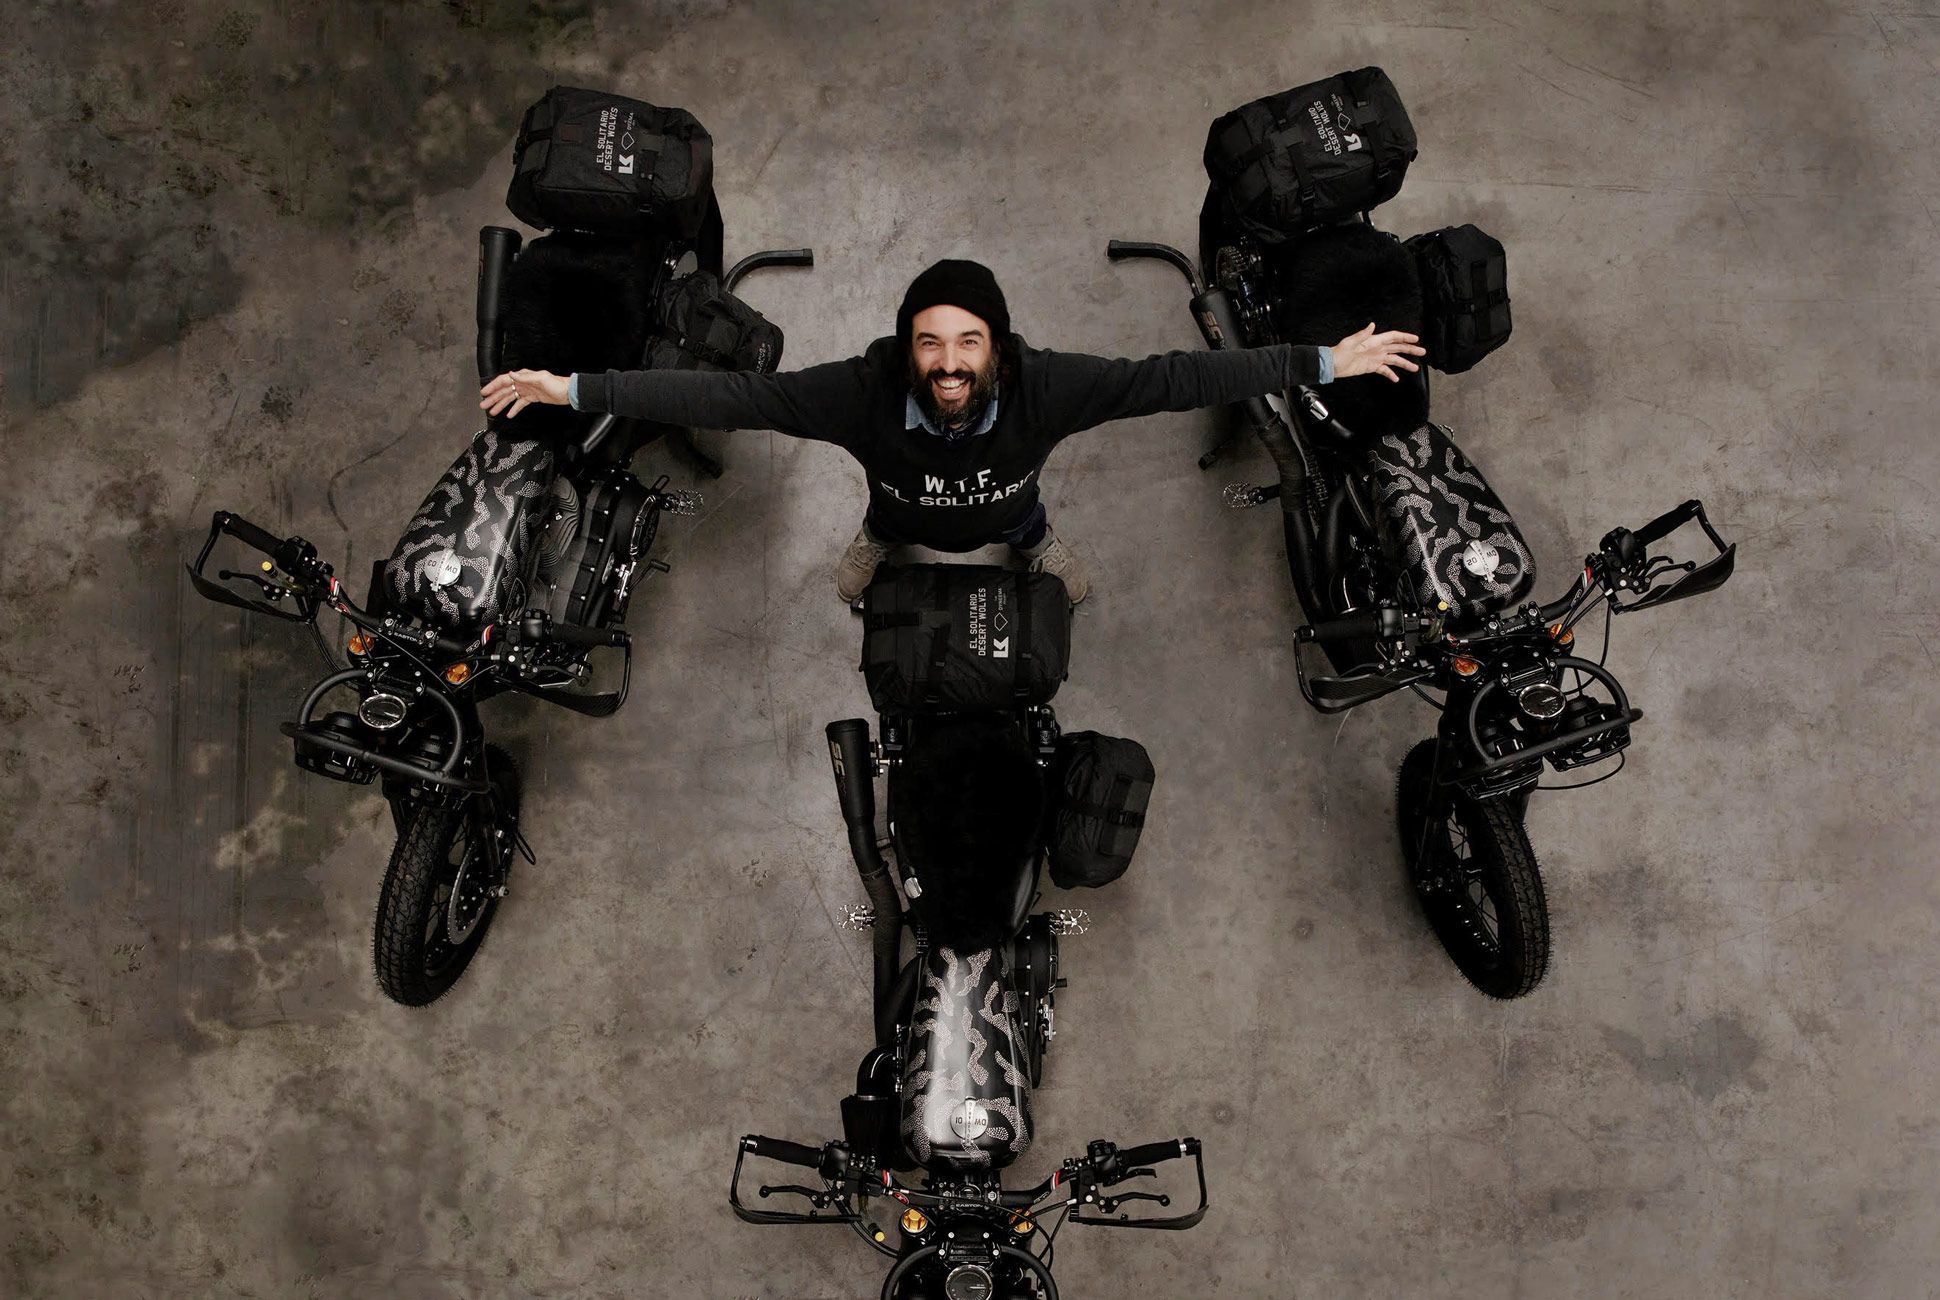 The Most Hated Custom Motorcycle Builder in the World